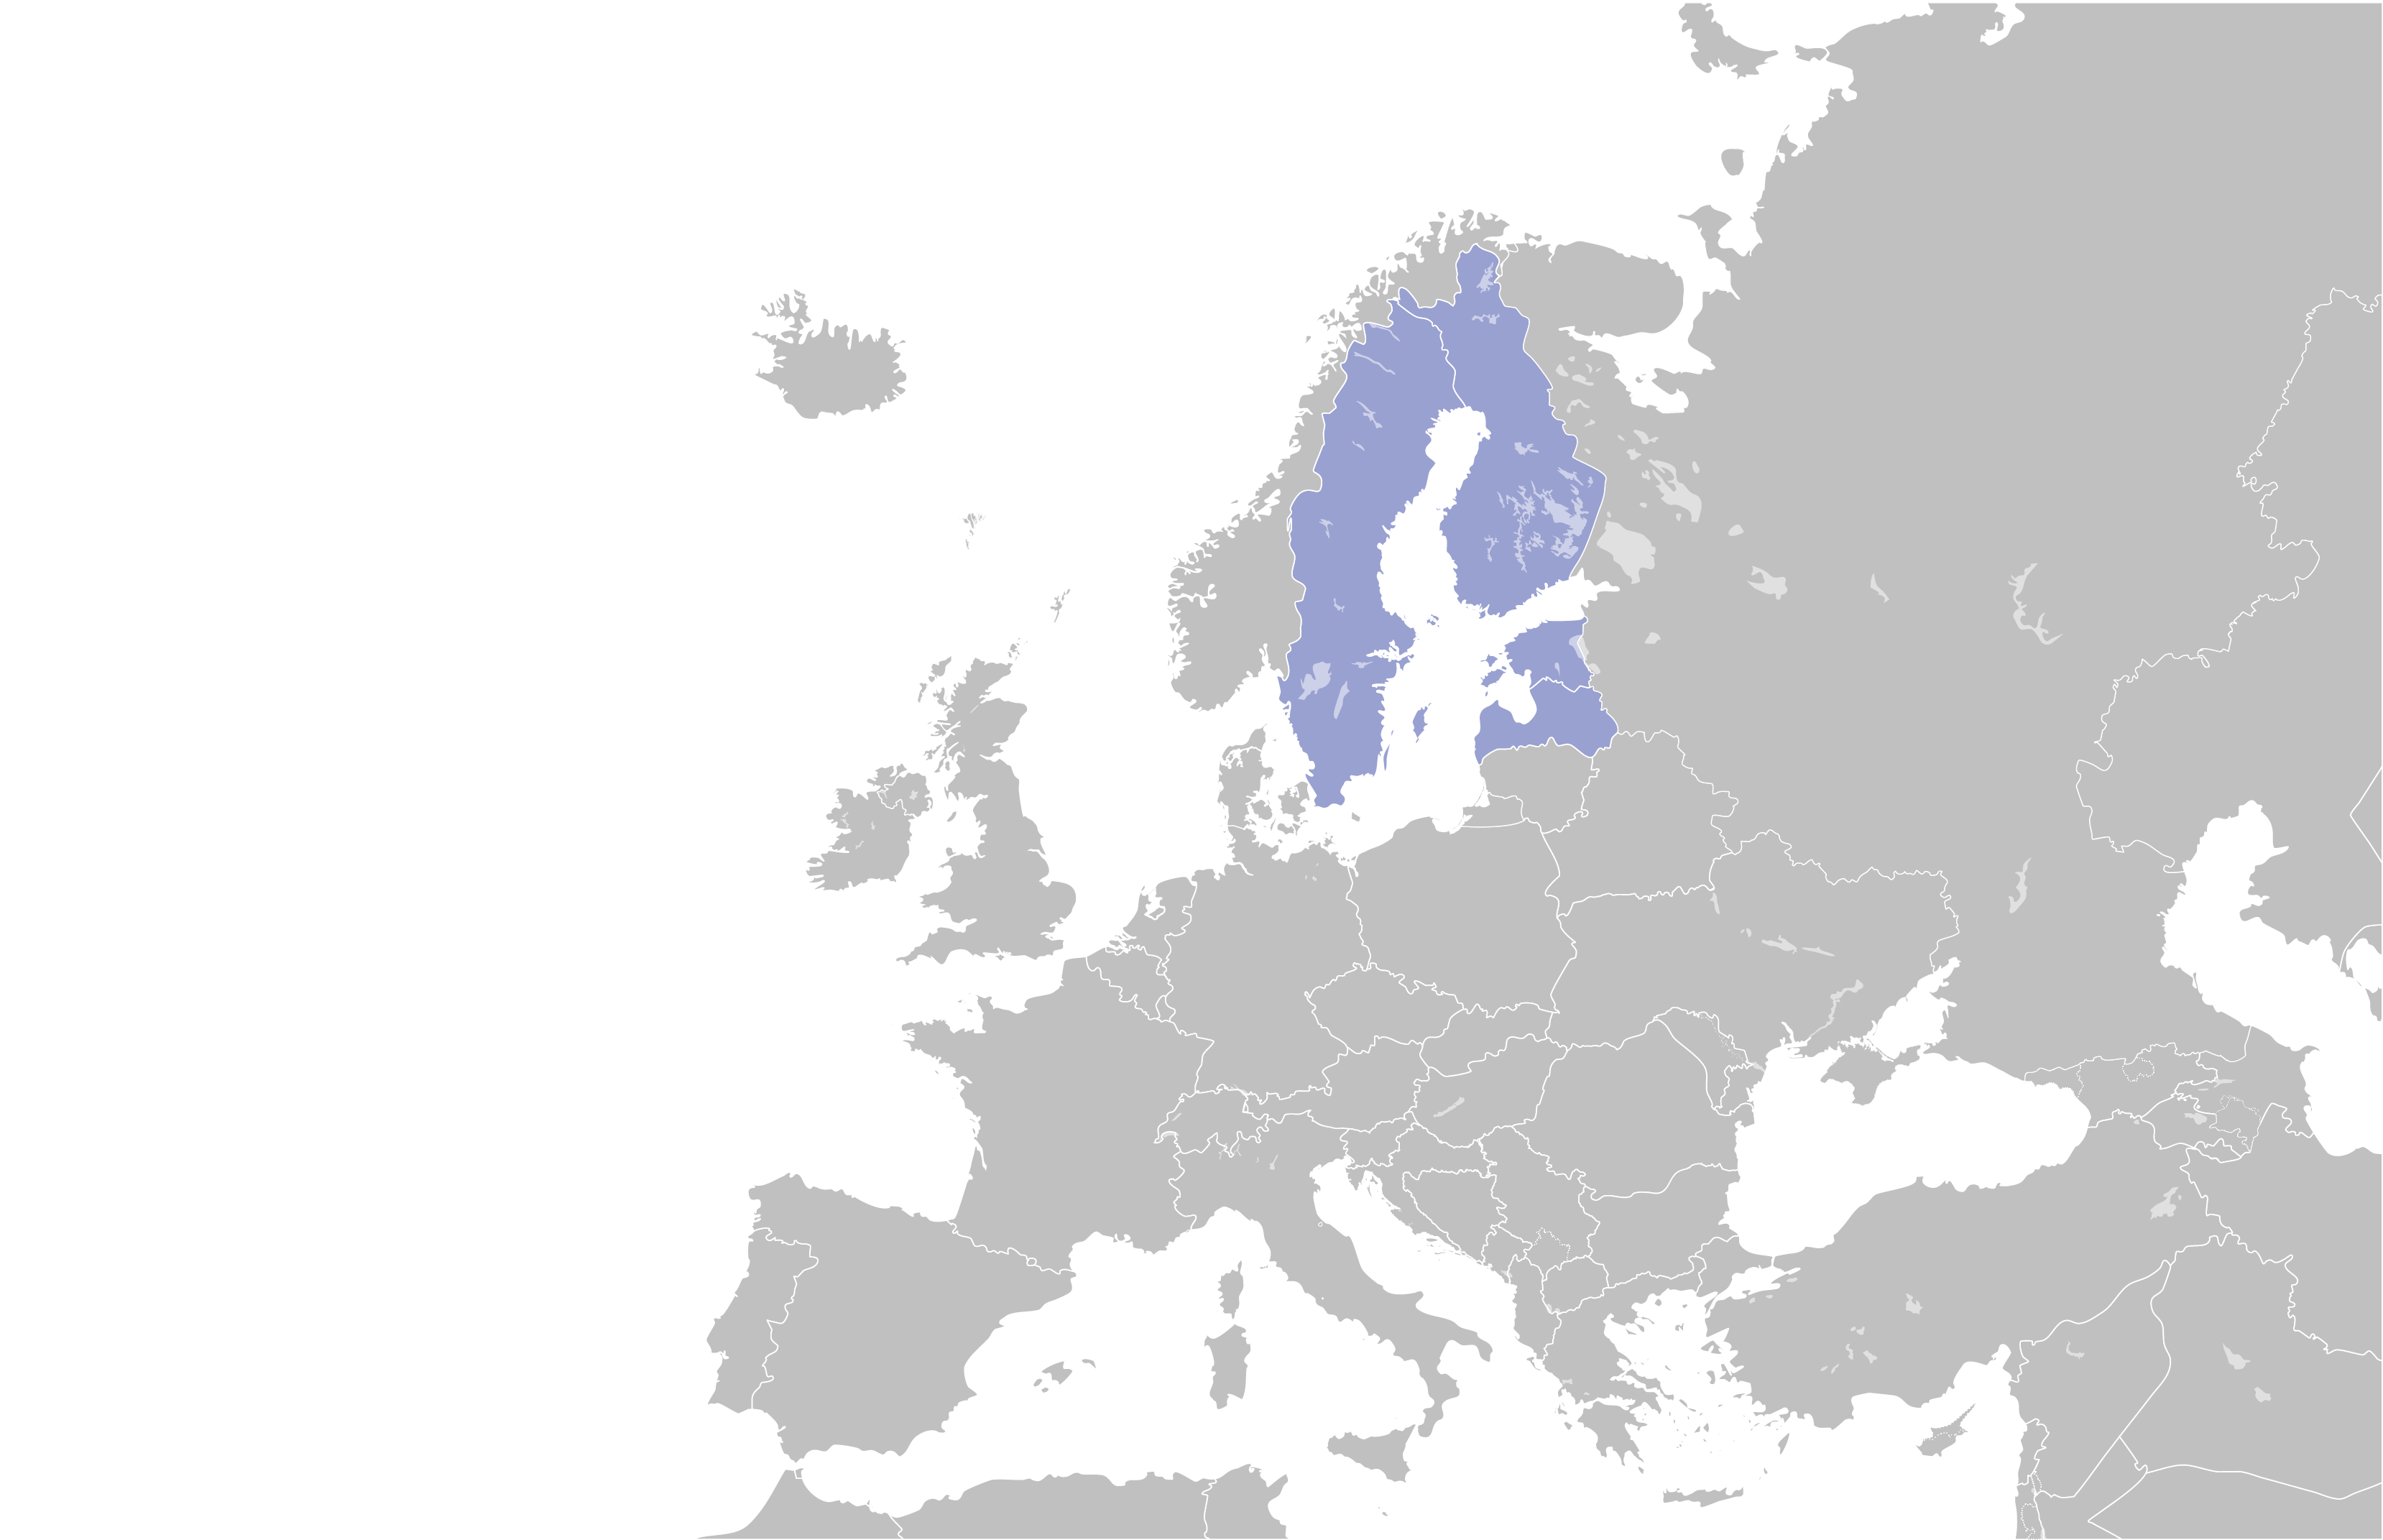 Europe map where Central Baltic counties are highlighted.